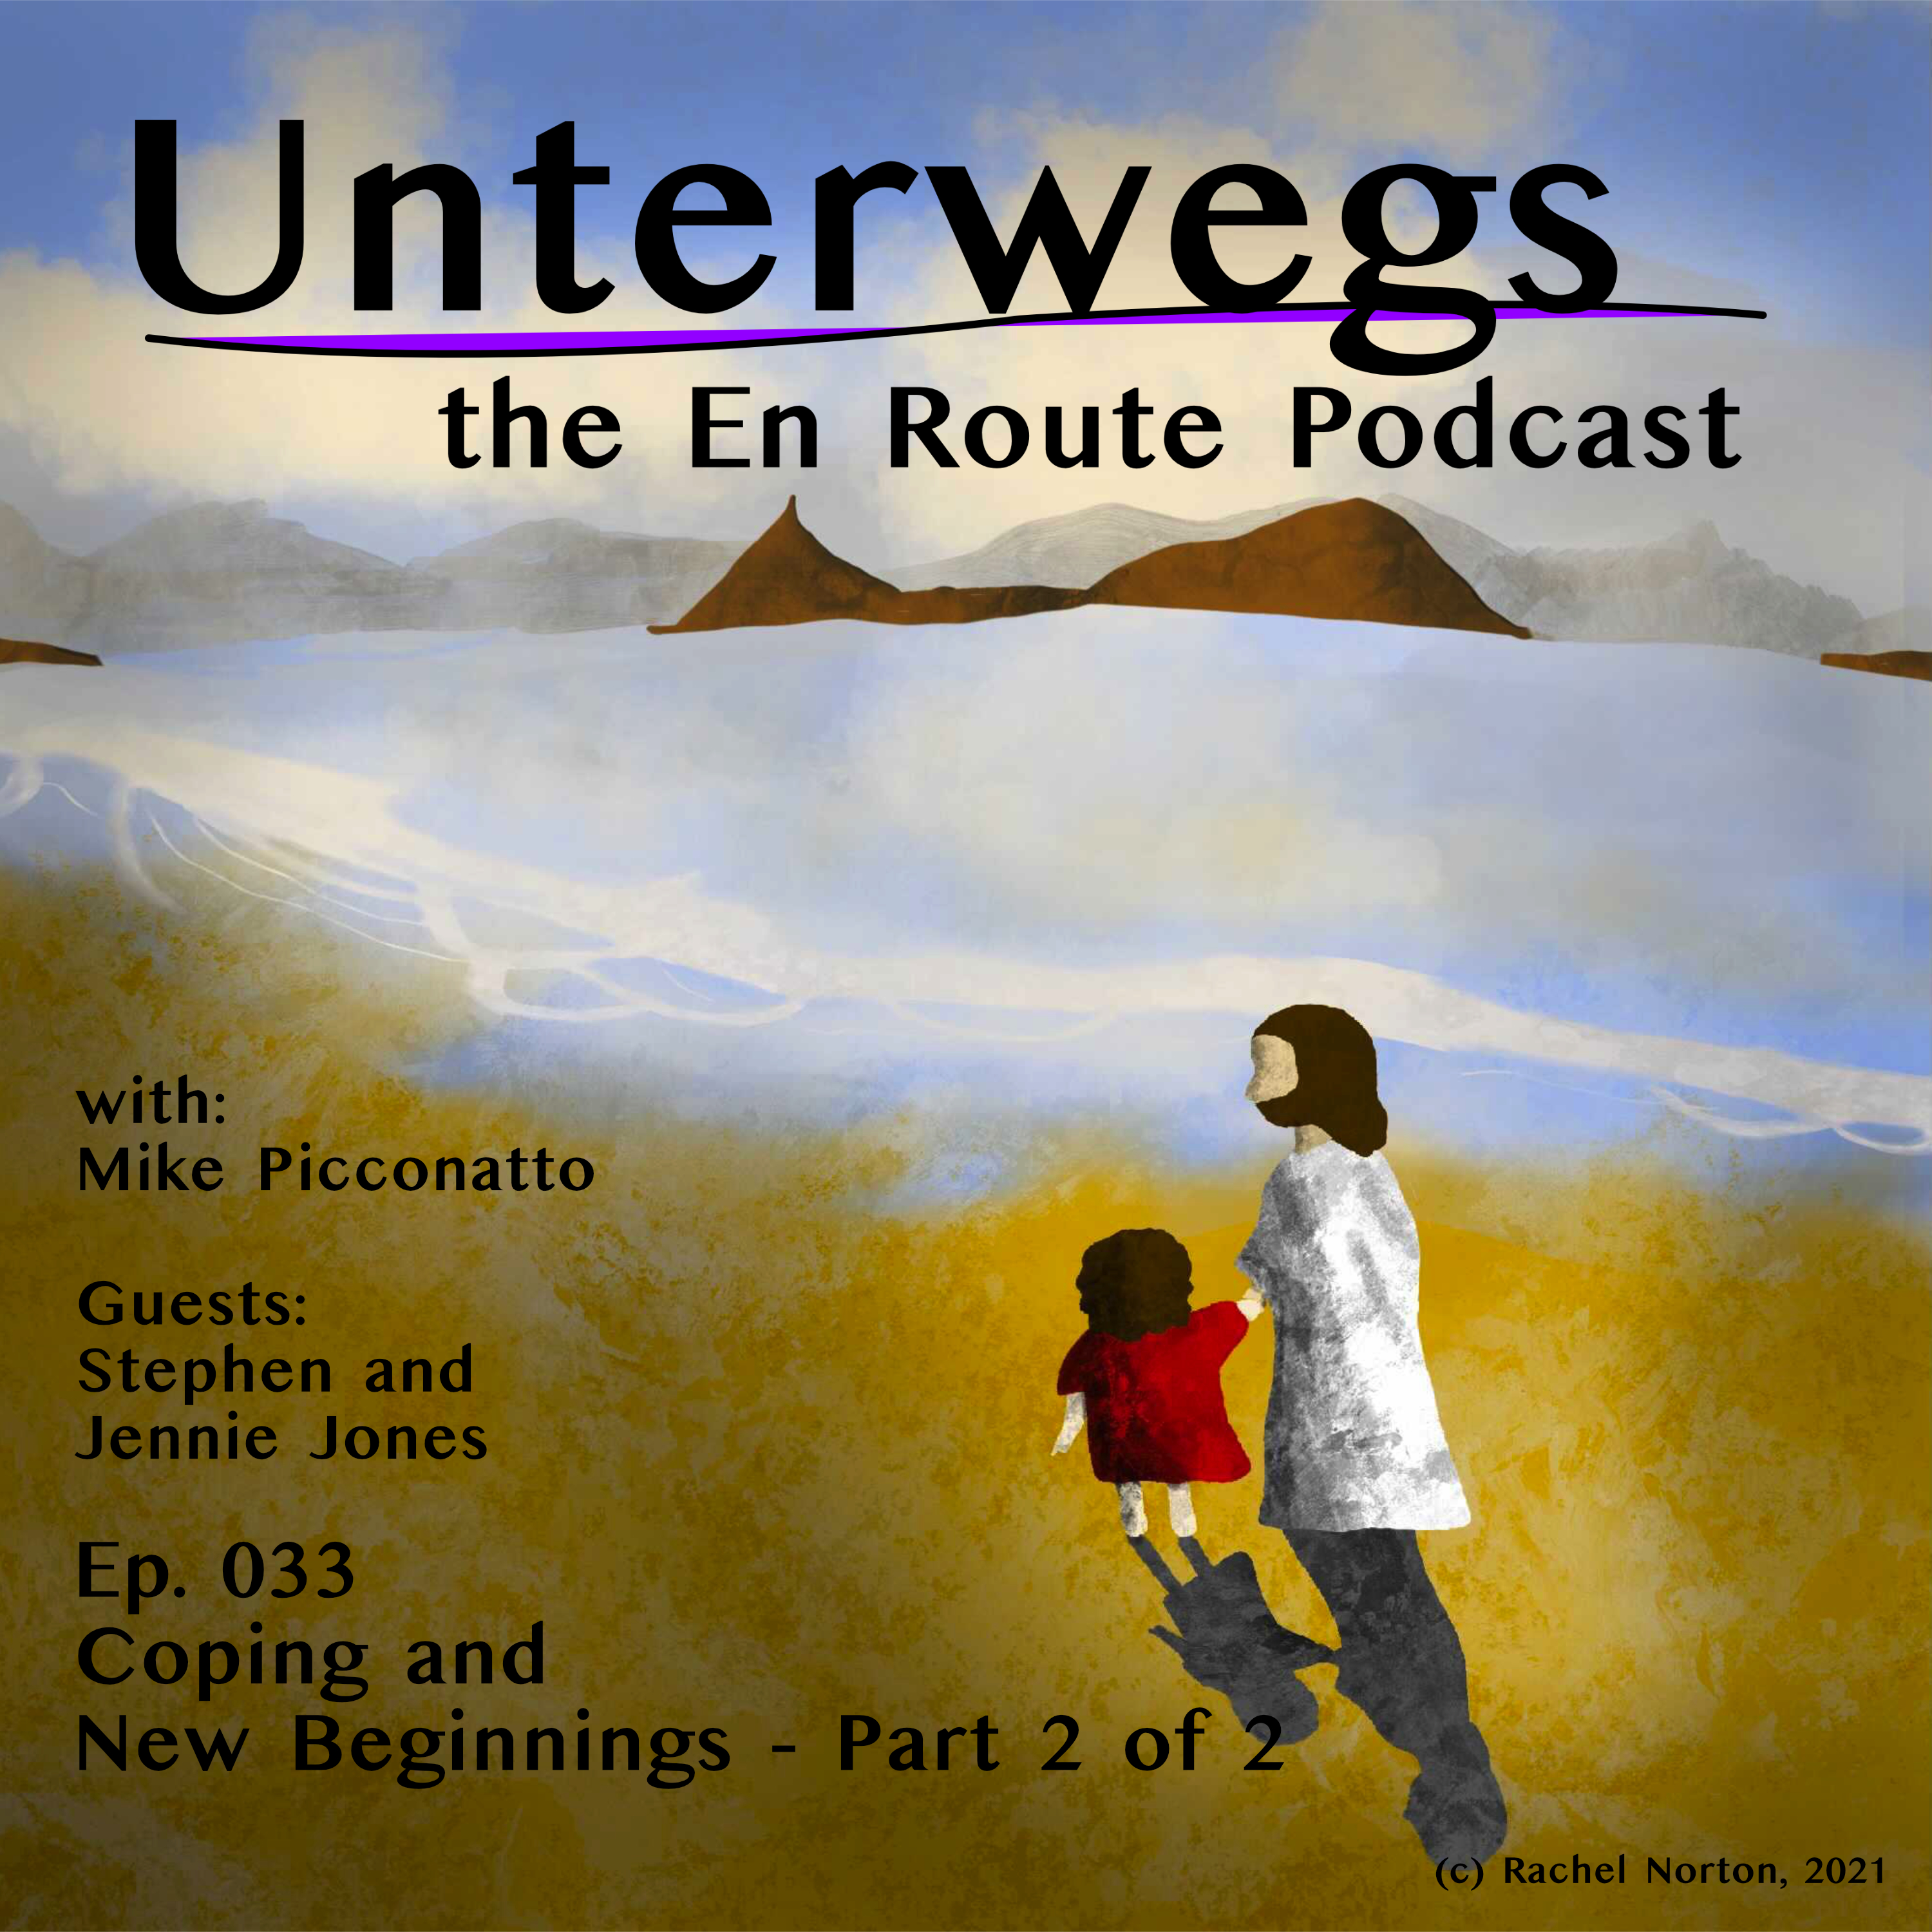 Episode 033 - Cultural Transitions - Coping and New Beginnings - Part 2 of 2